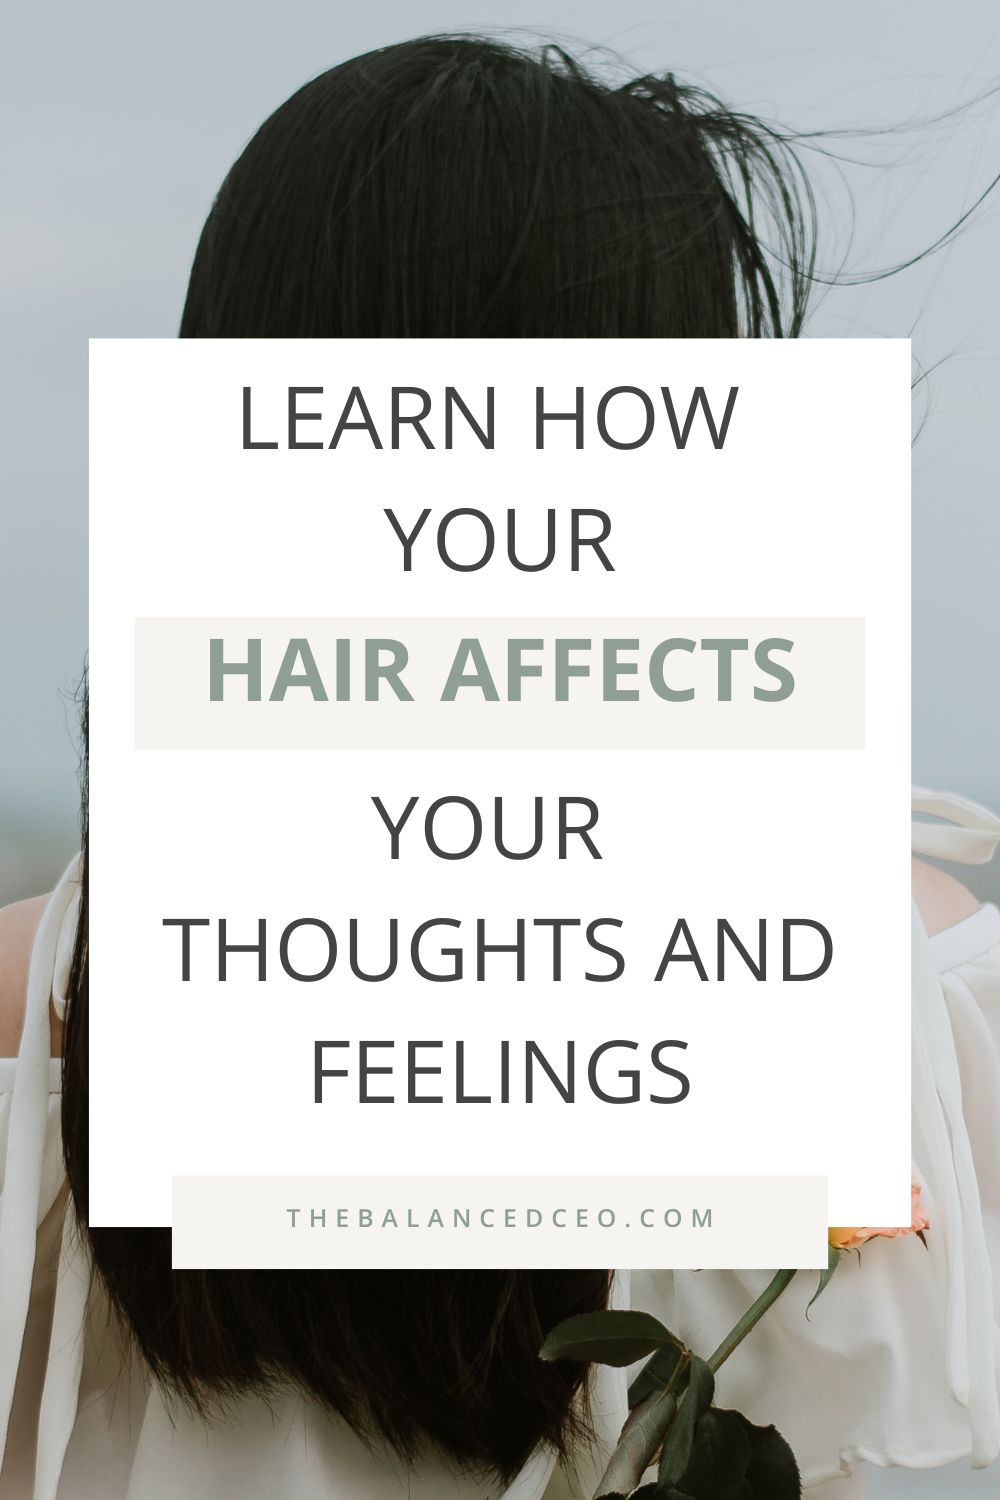 Learn How Your Hair Affects Your Thoughts and Feelings